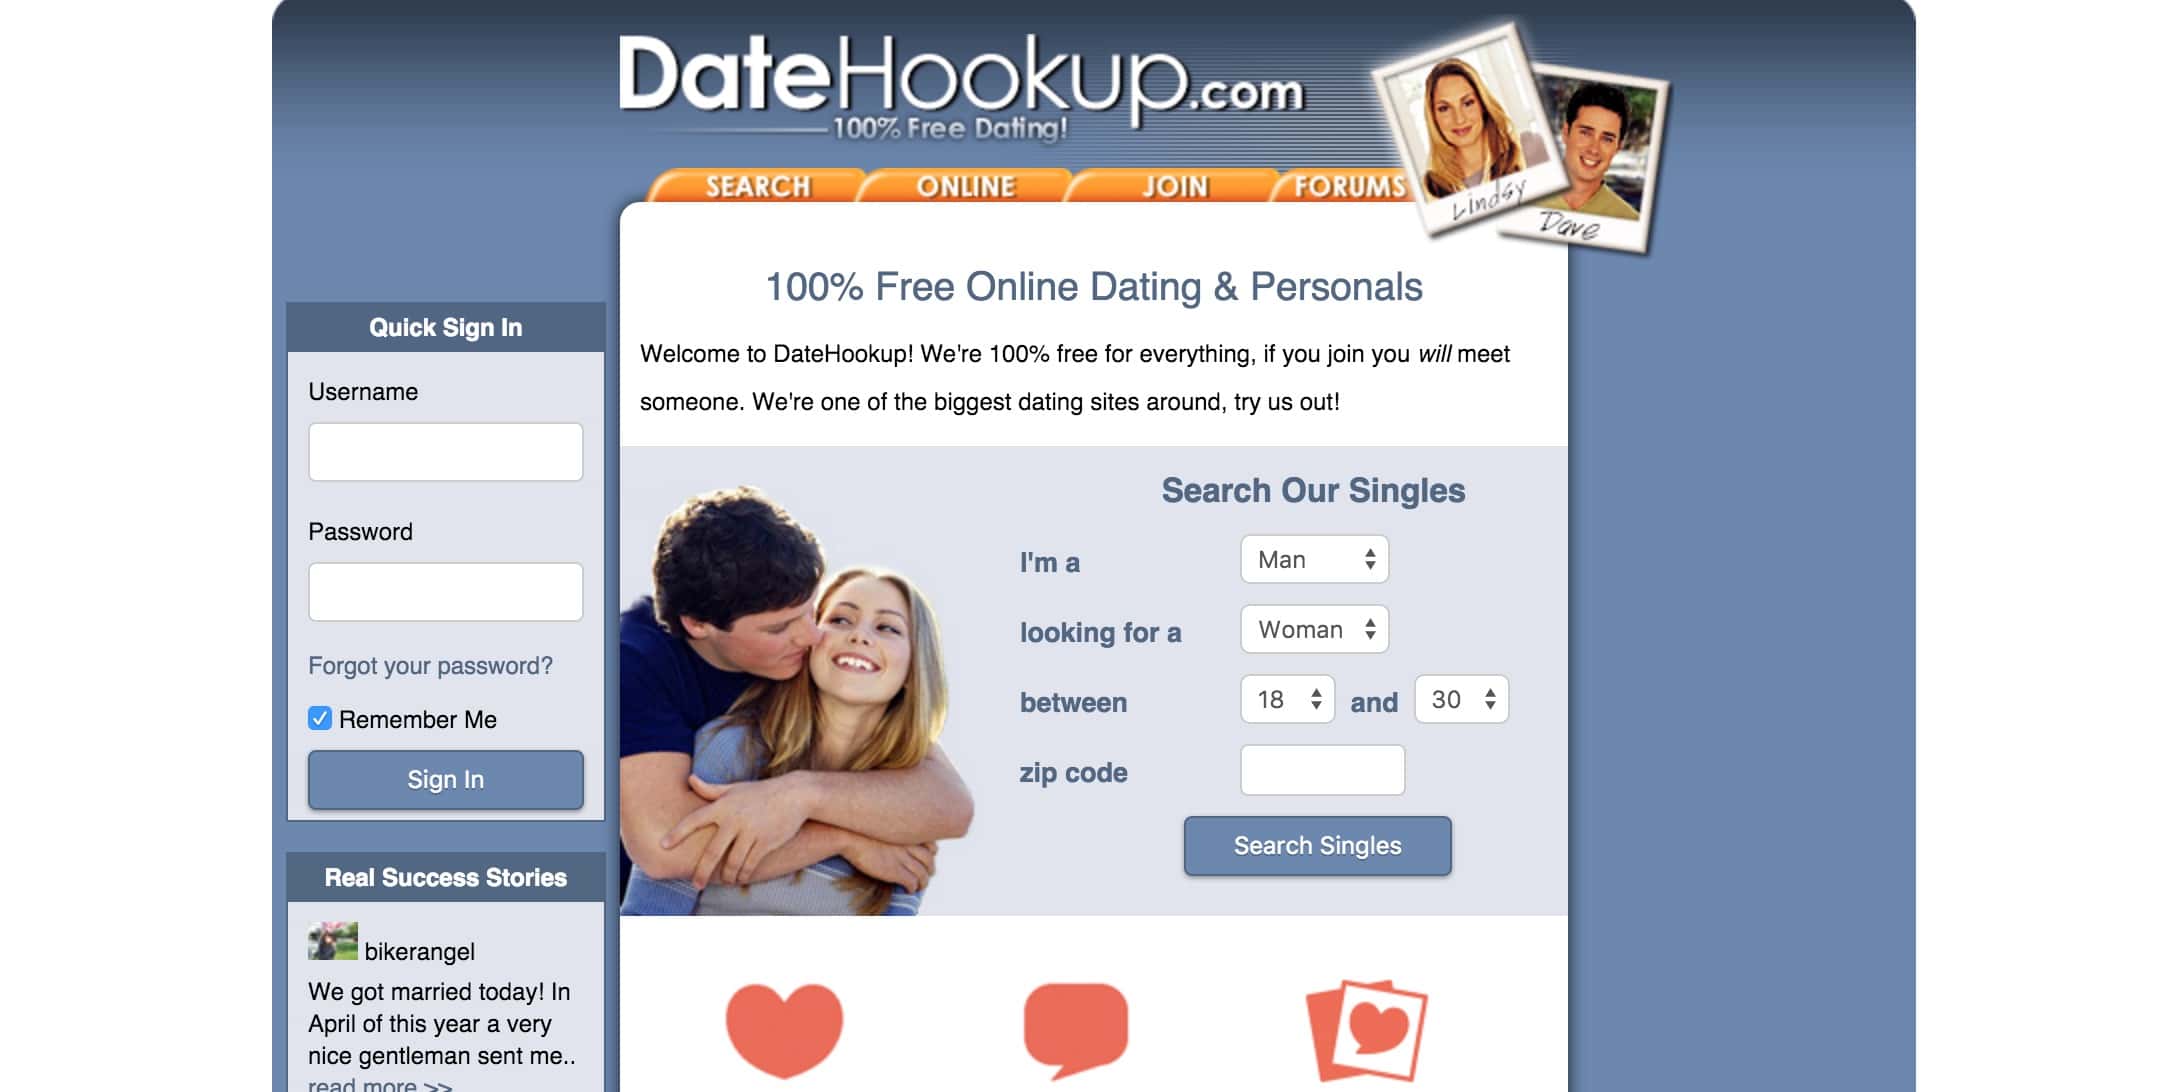 New usernames for online dating sites